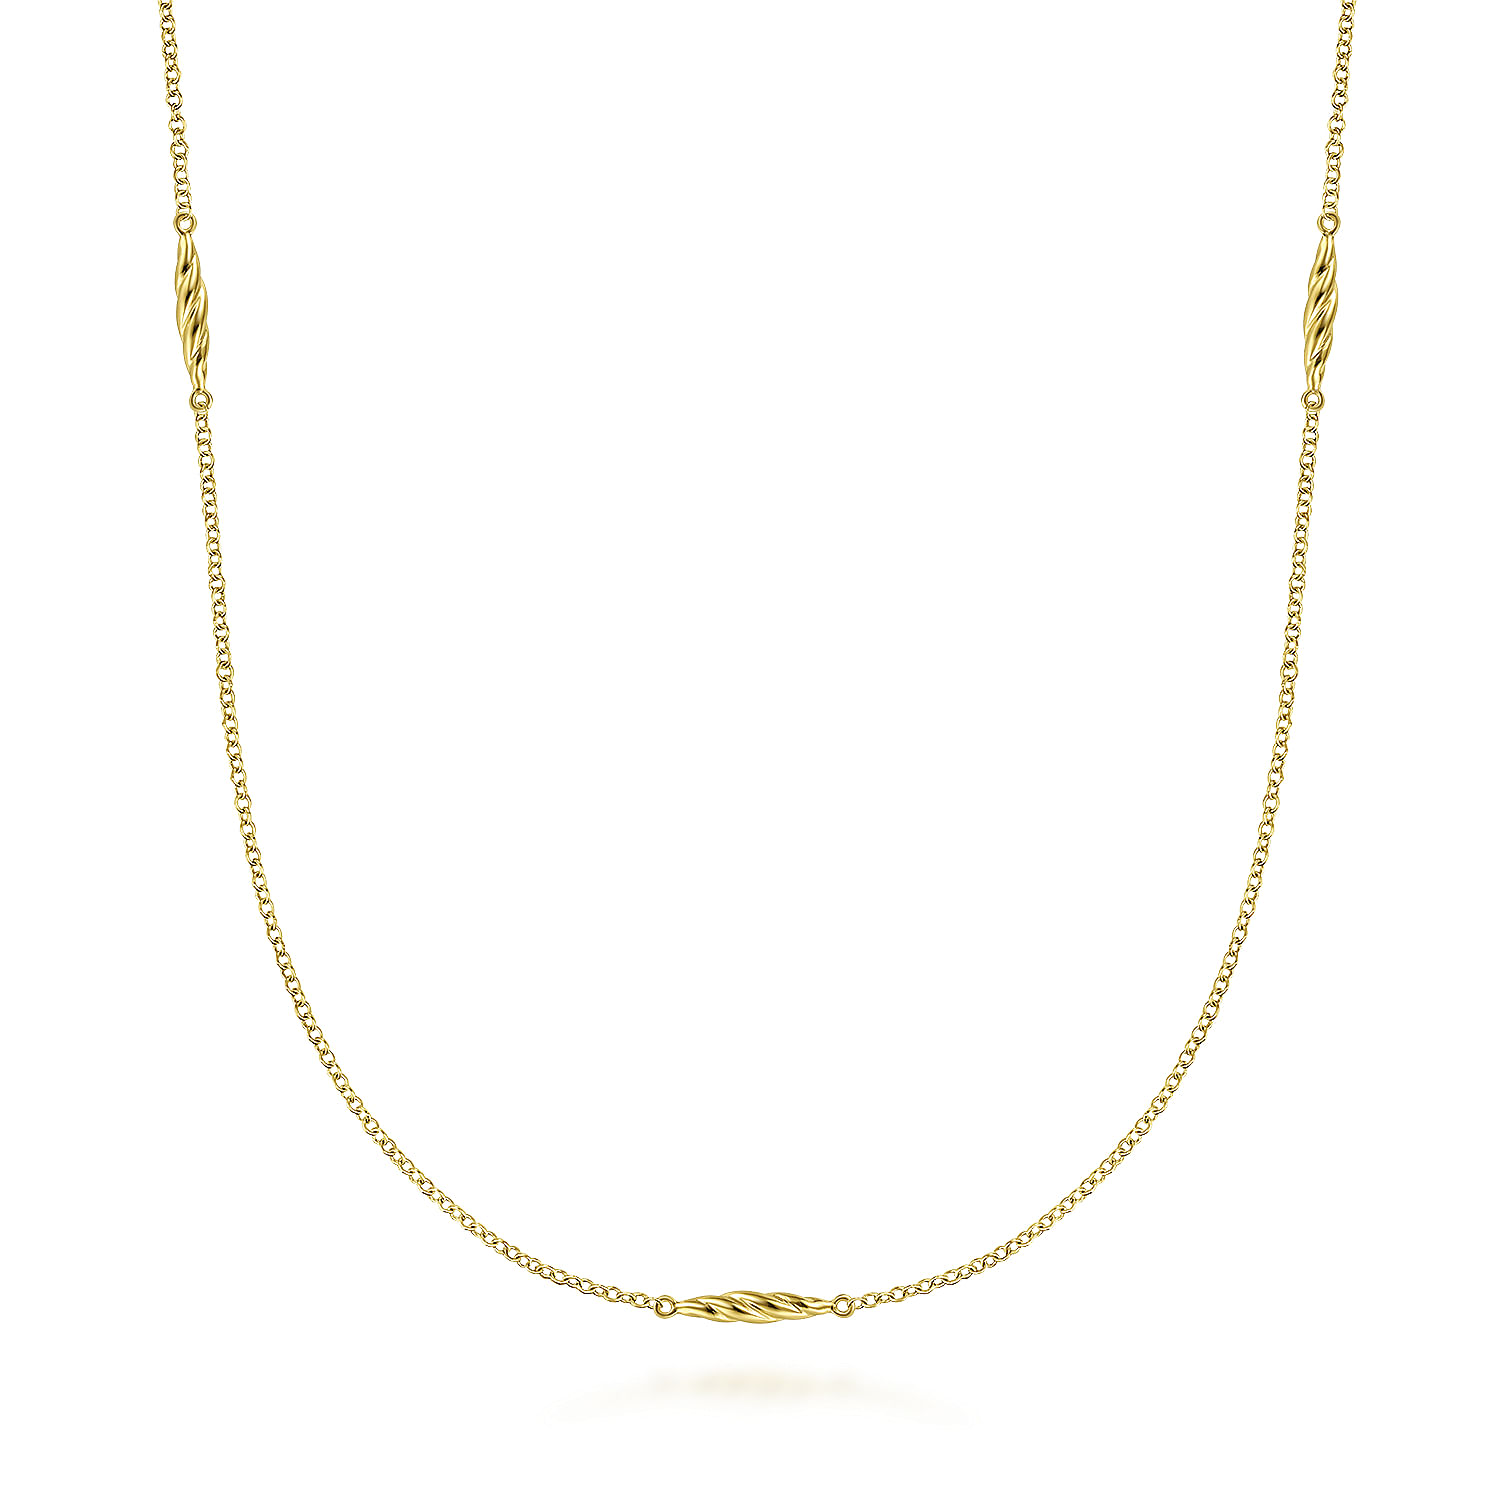 Gabriel - 32 inch 14K Yellow Gold Chain Necklace with Twisted Tube Stations